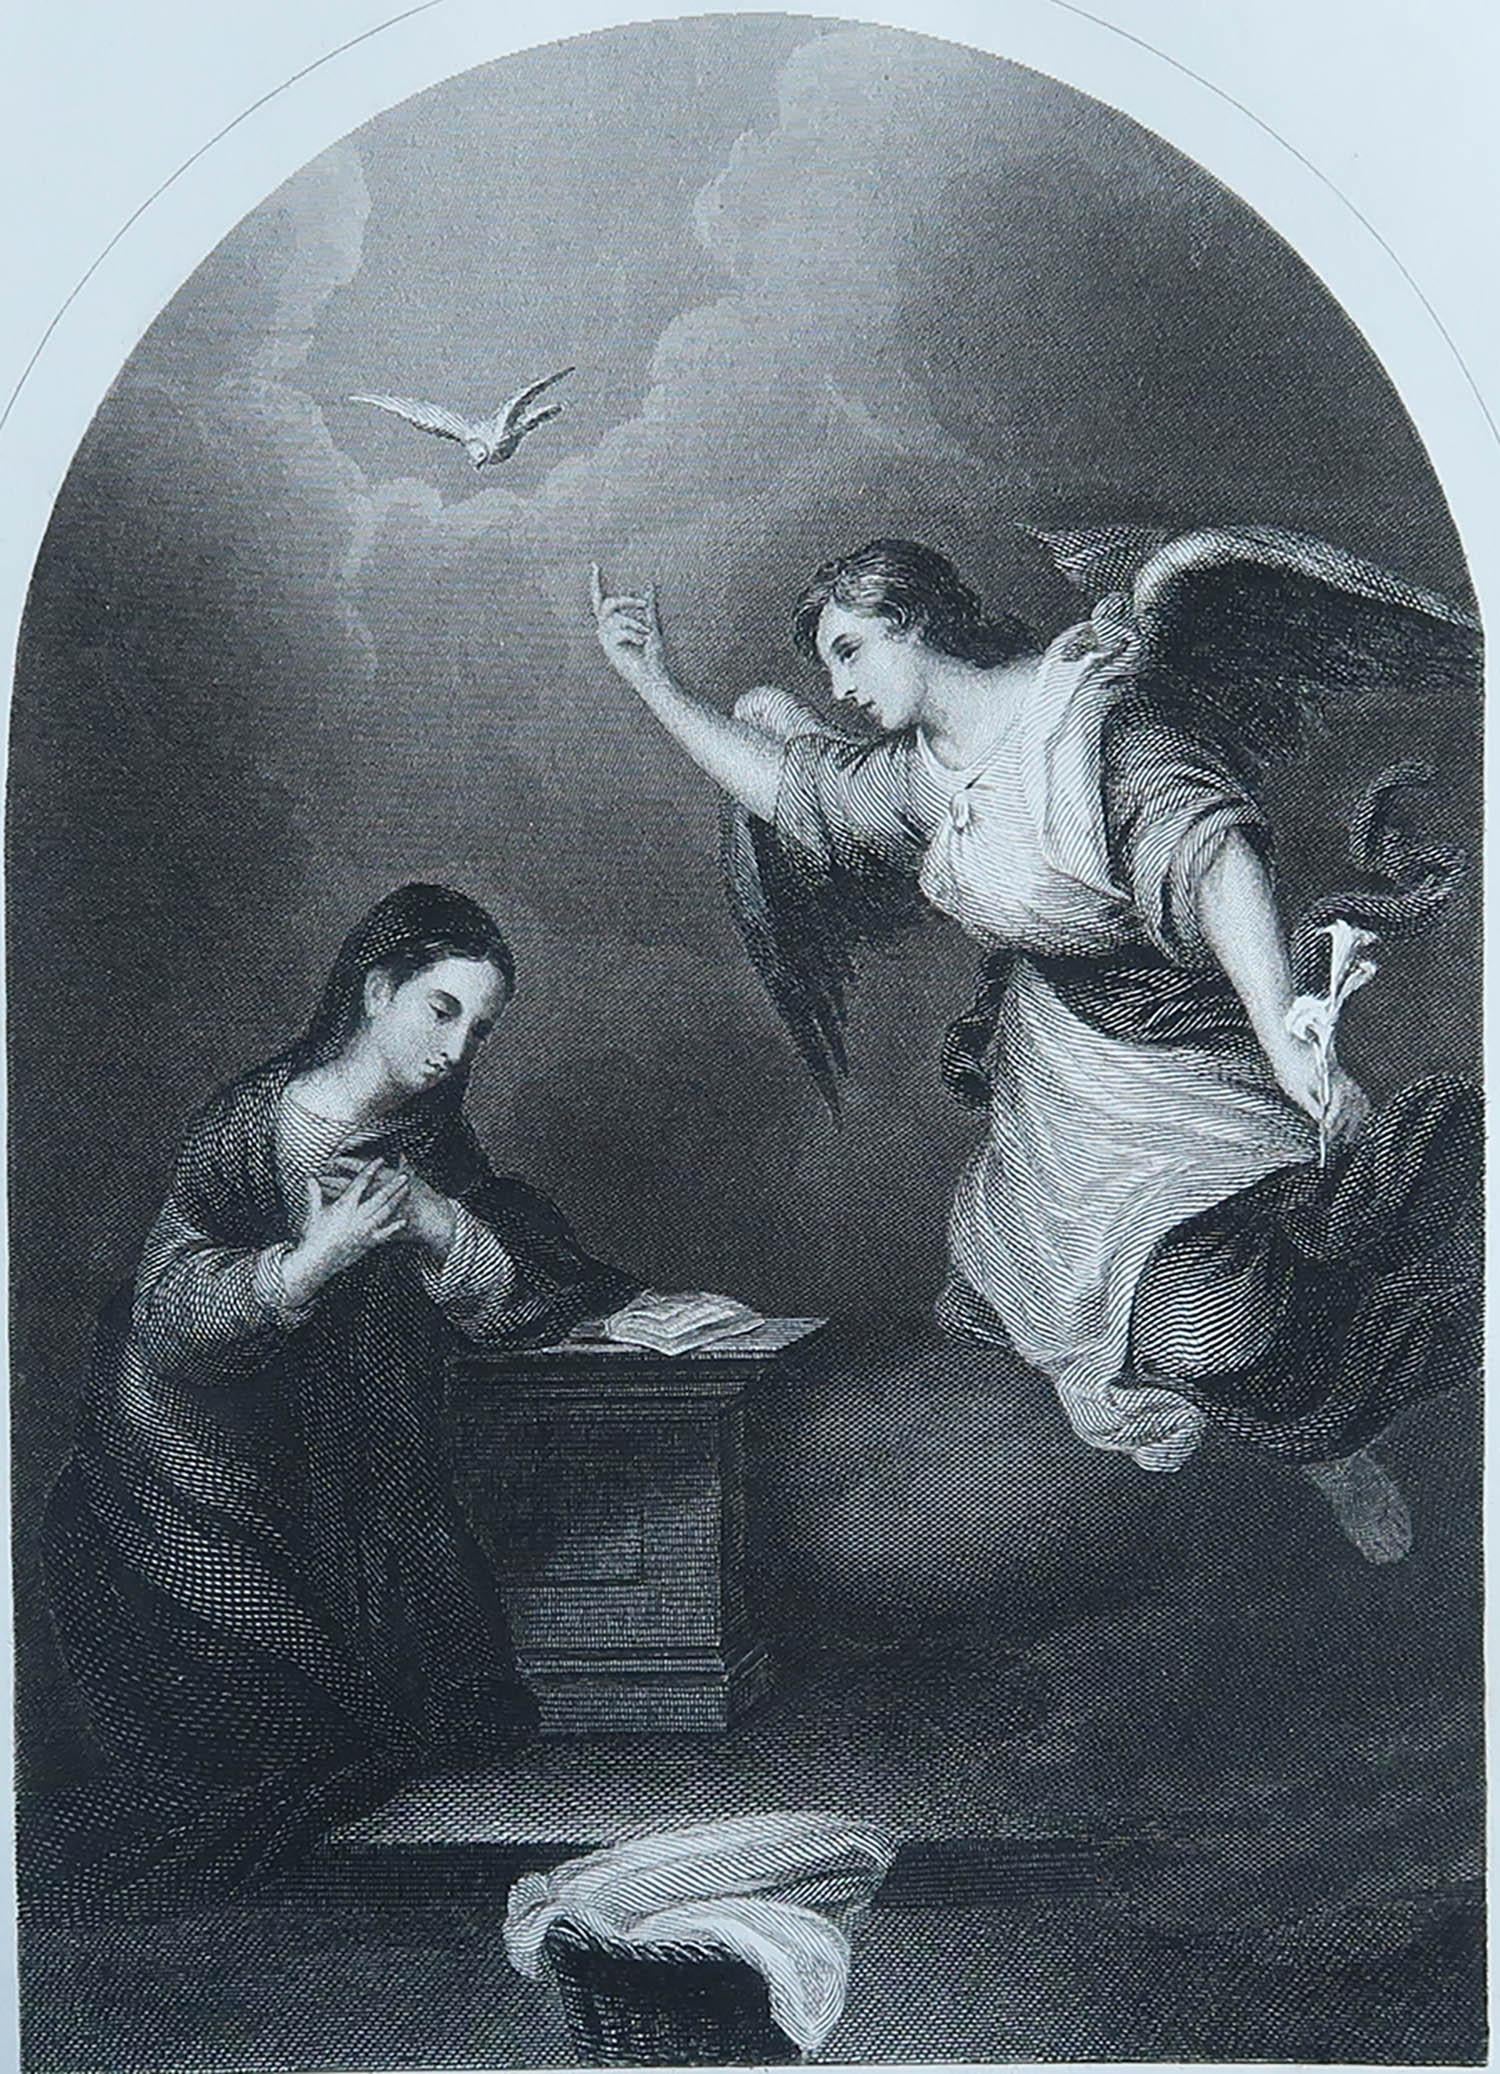 Great image after Murillo

Fine steel engraving

Published circa 1850

Unframed.